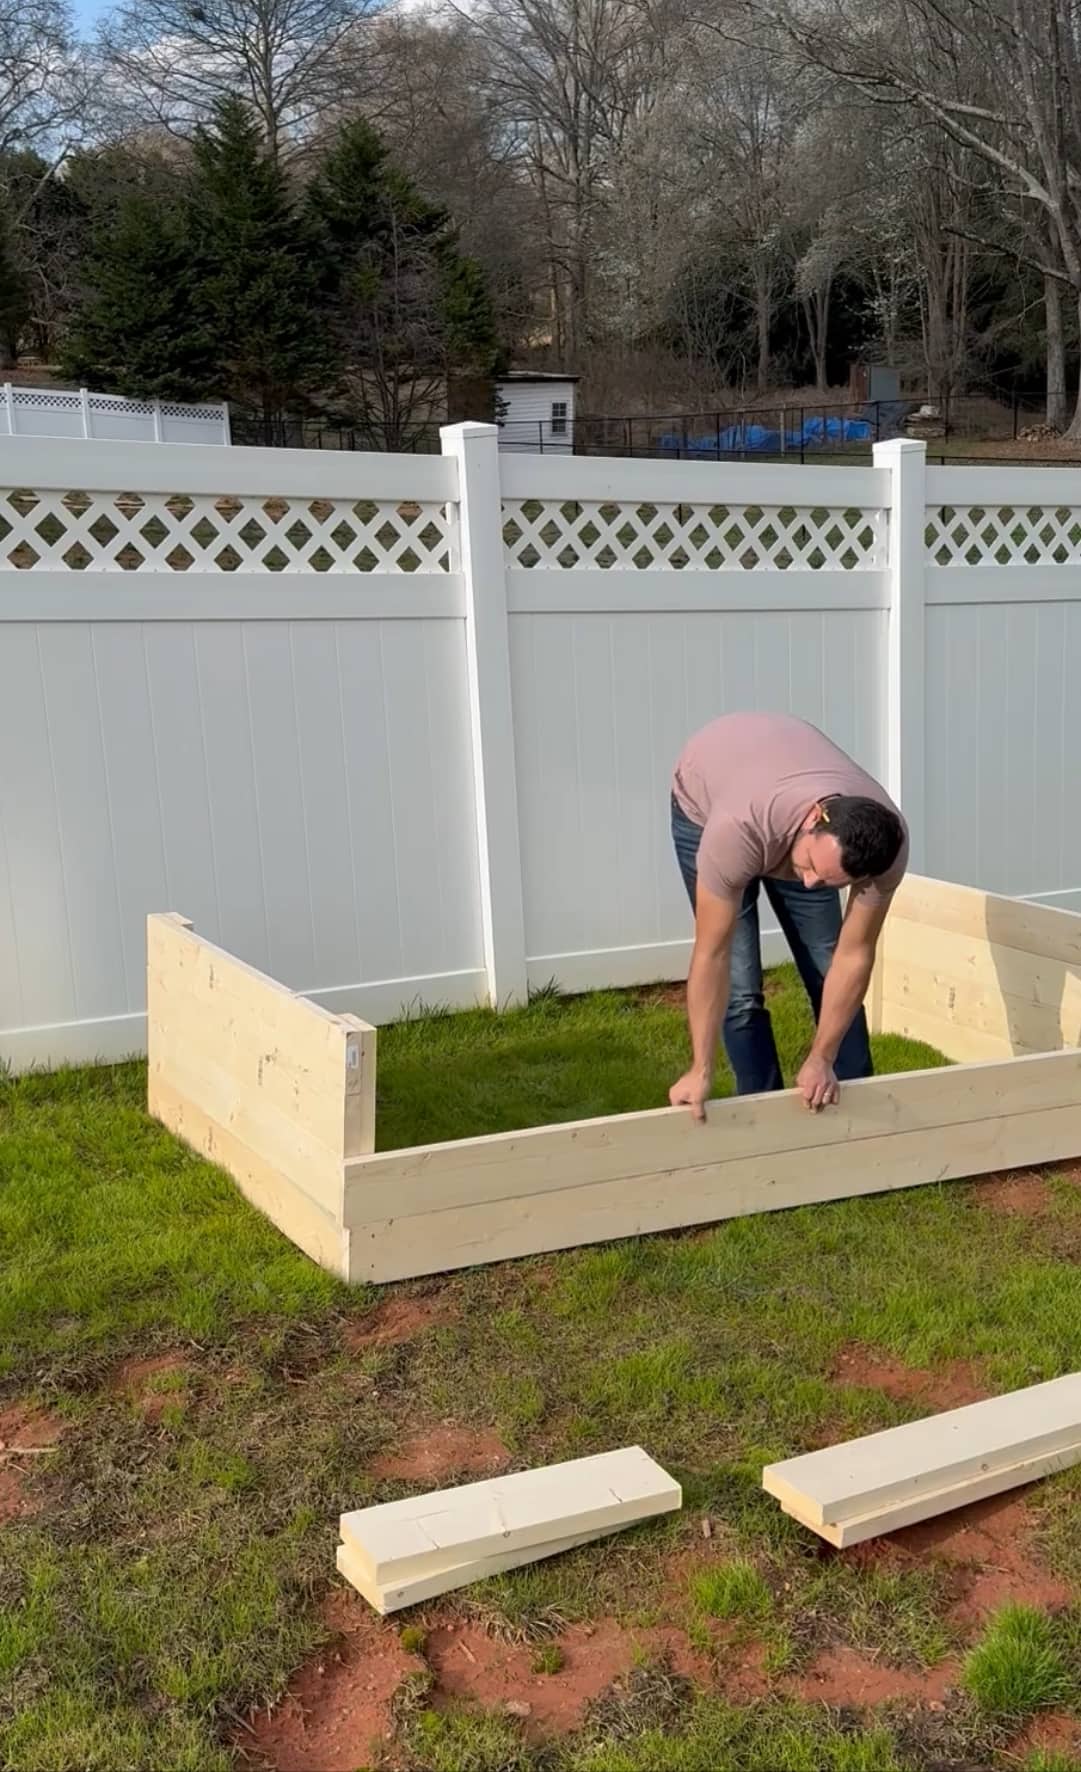 Clayton builds and assembles his raised garden bed - 2